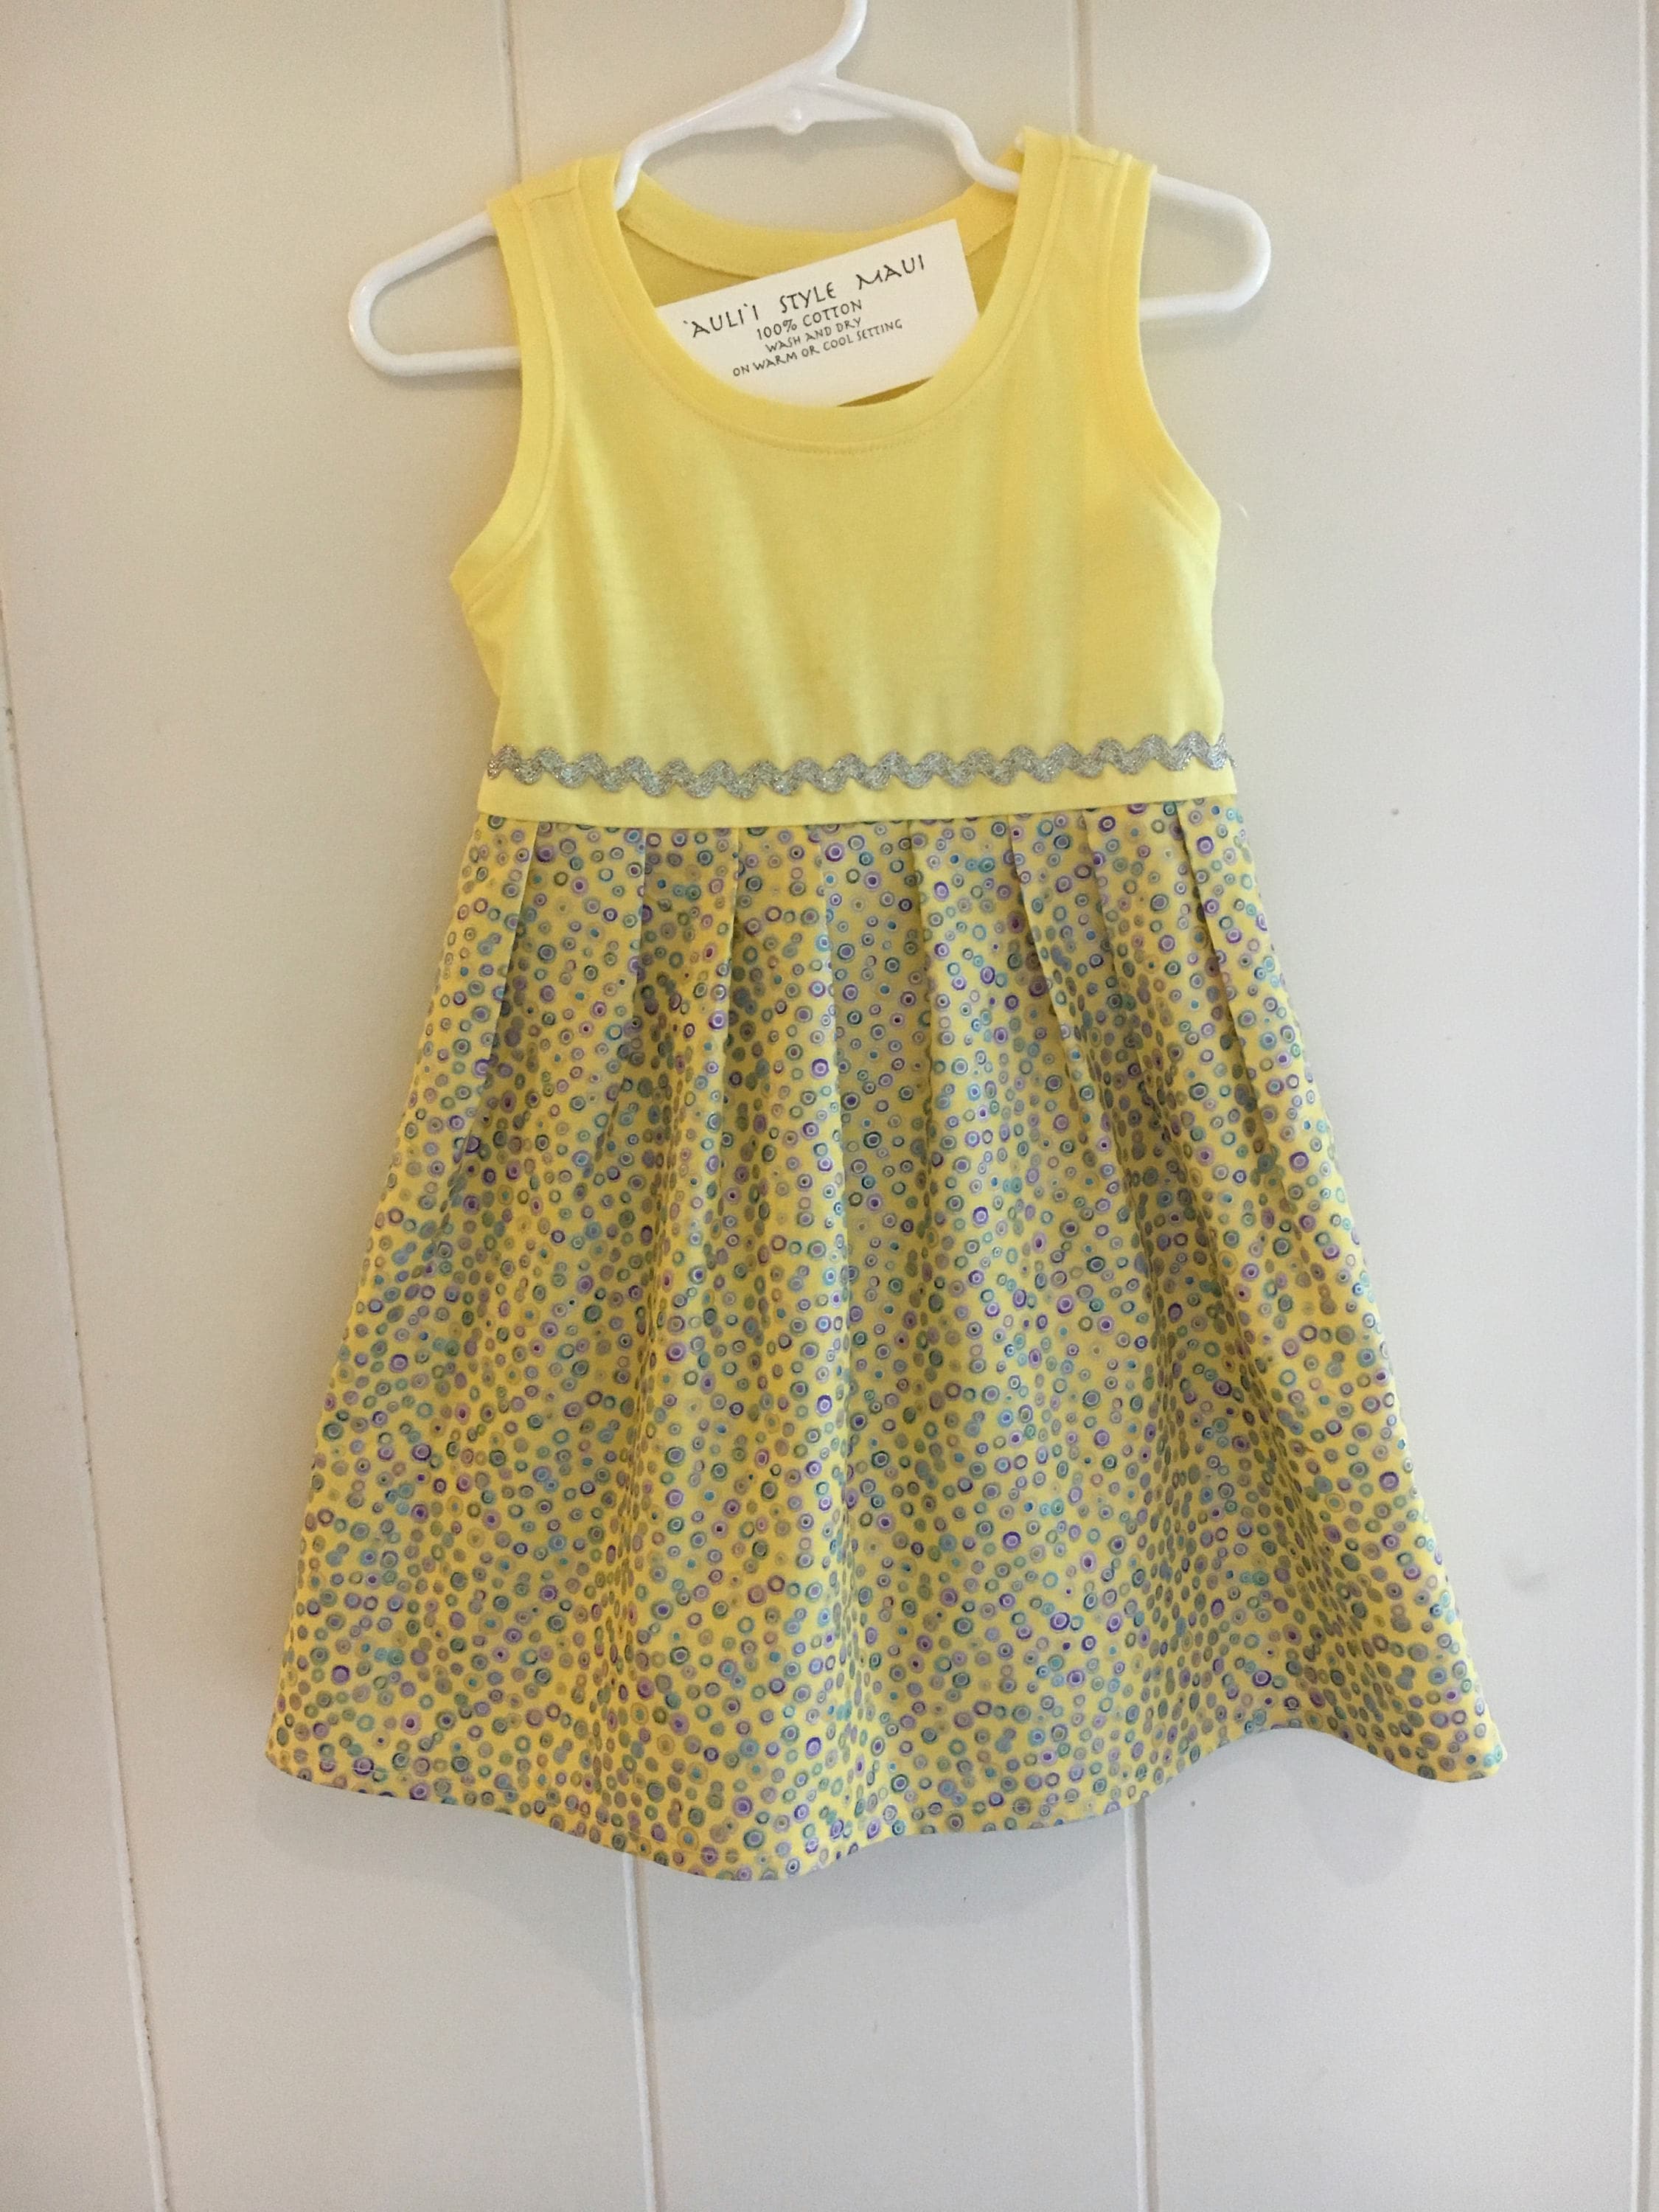 Toddler size 3-T Sunny Yellow Dress